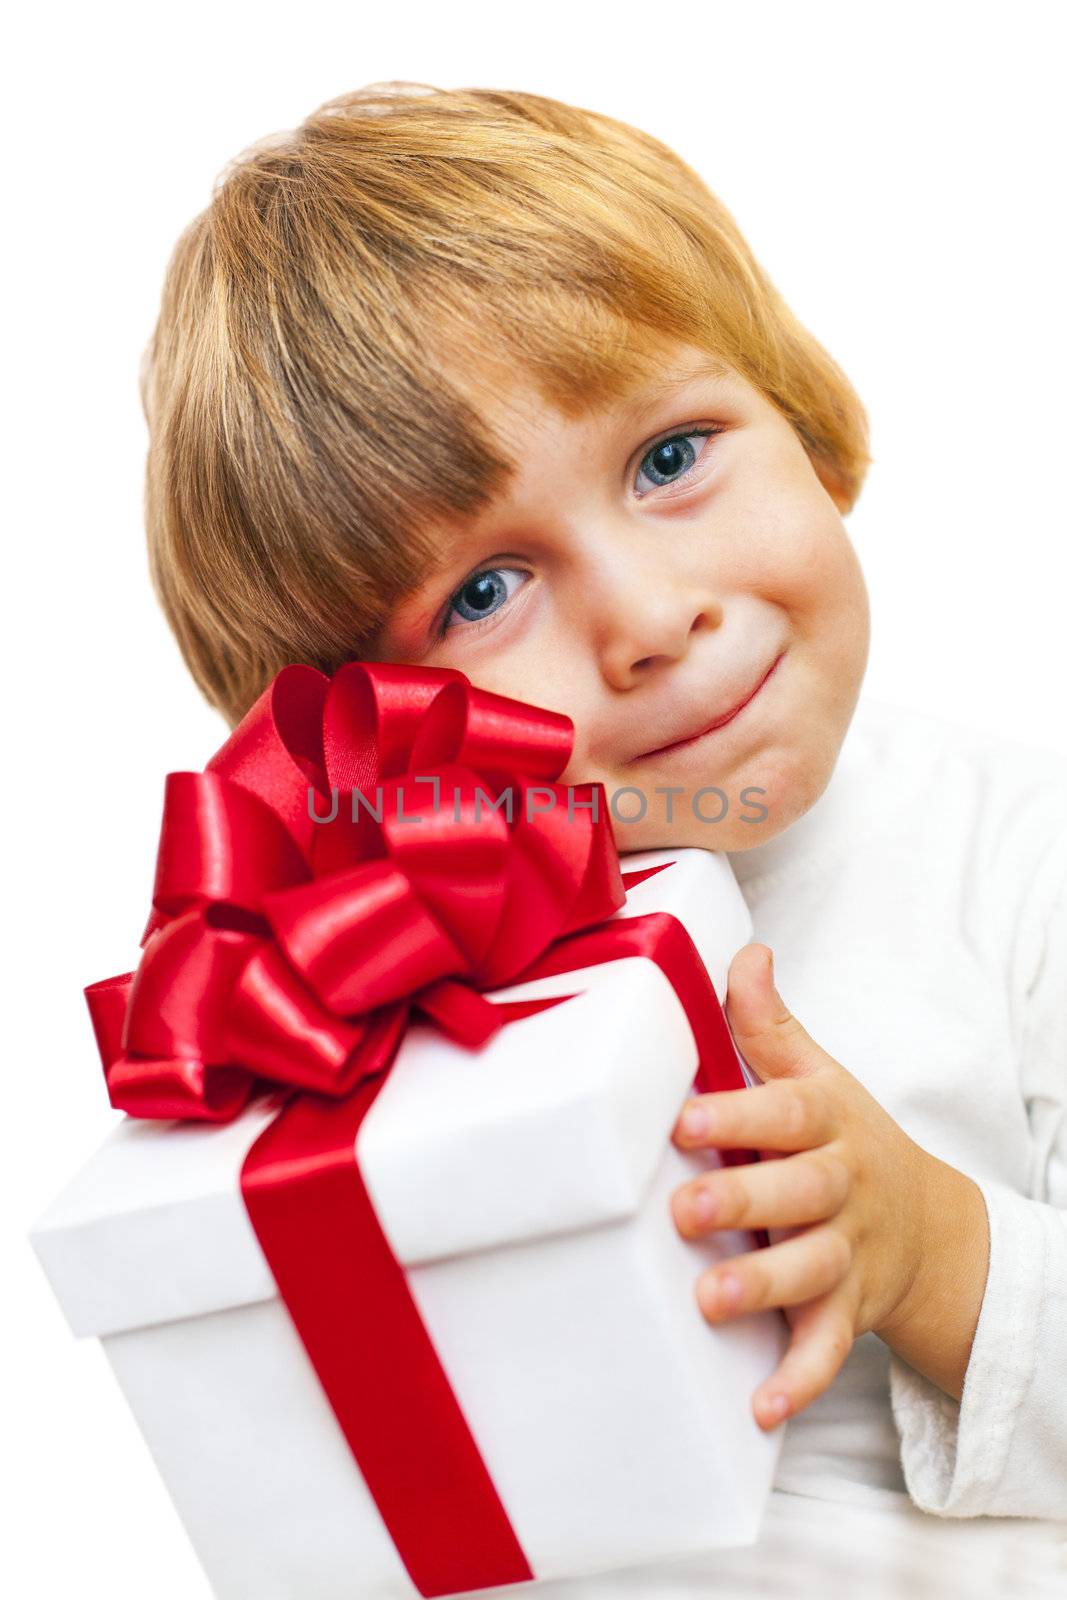 Smiling Boy holding present box isolated on white